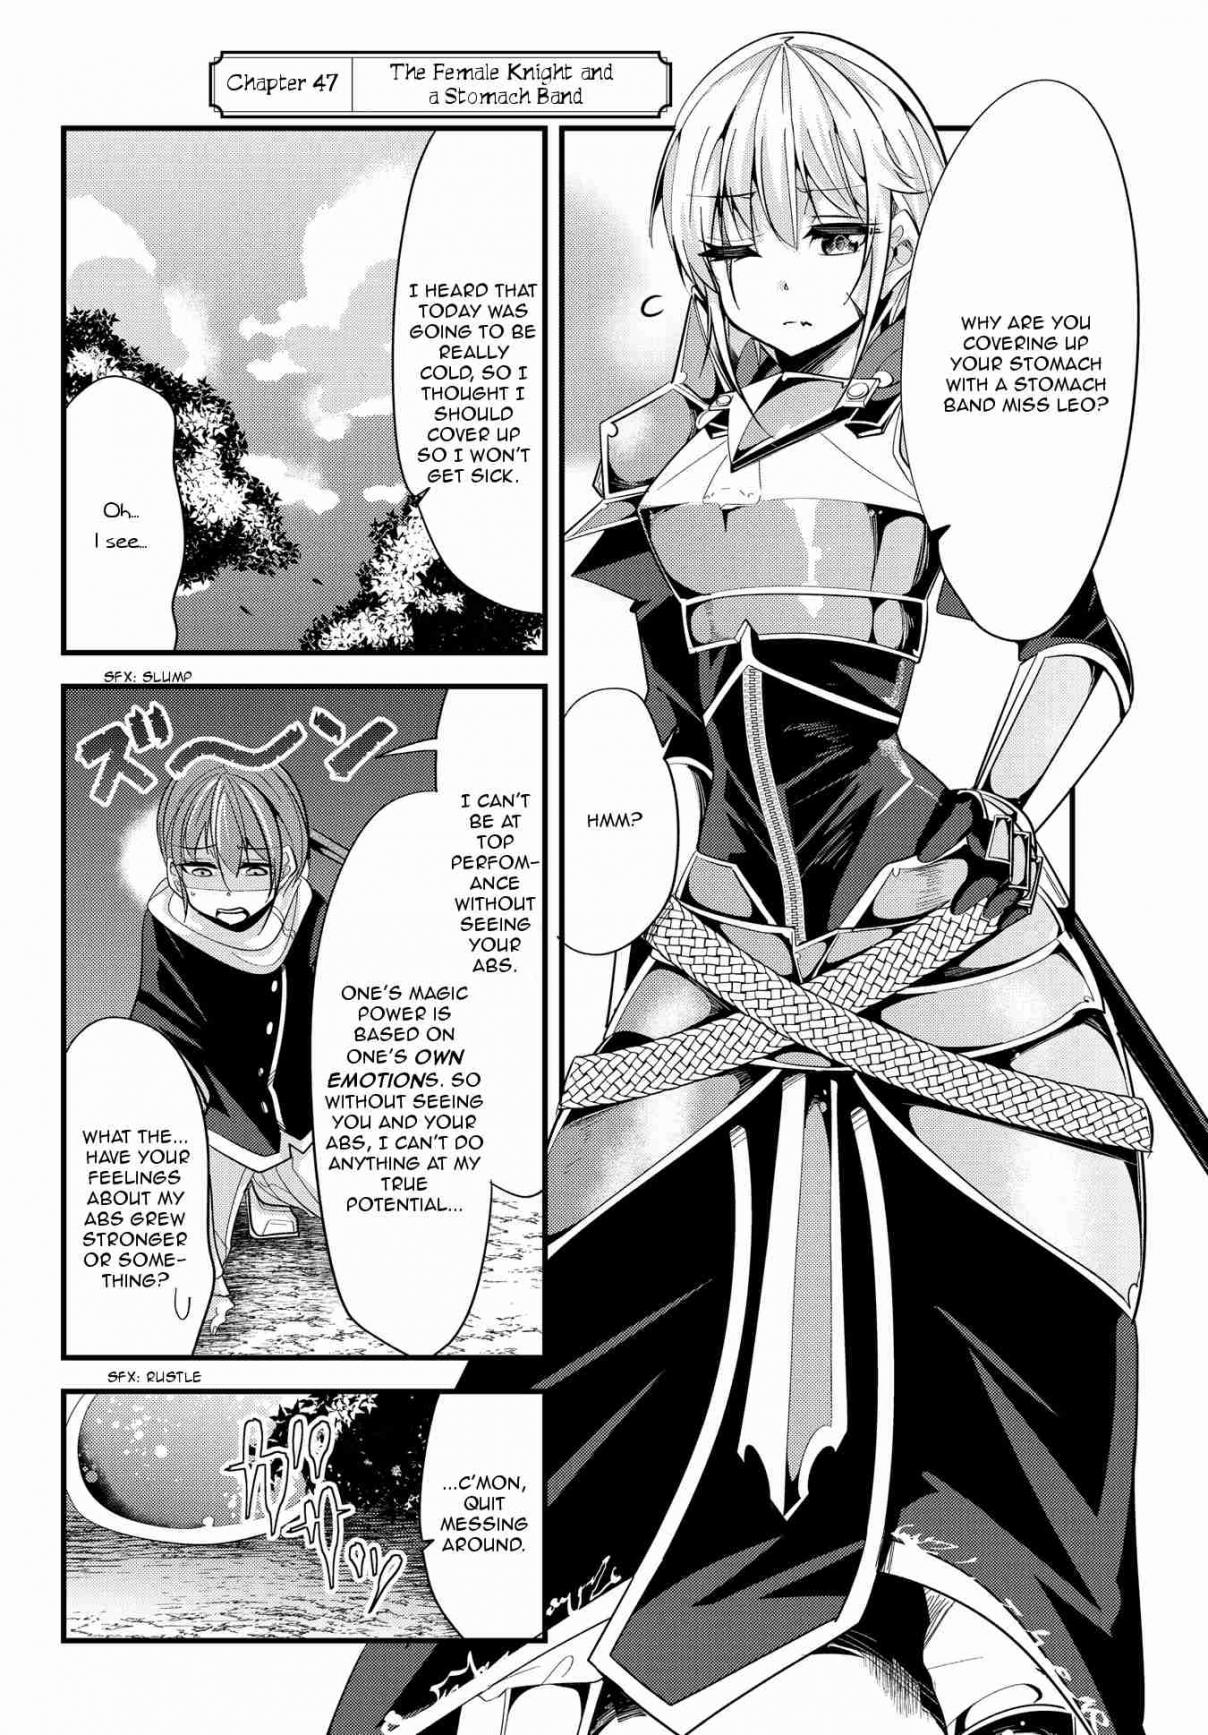 A Story About Treating a Female Knight, Who Has Never Been Treated as a Woman, as a Woman Ch. 47 The Female Knight and a Stomach Band